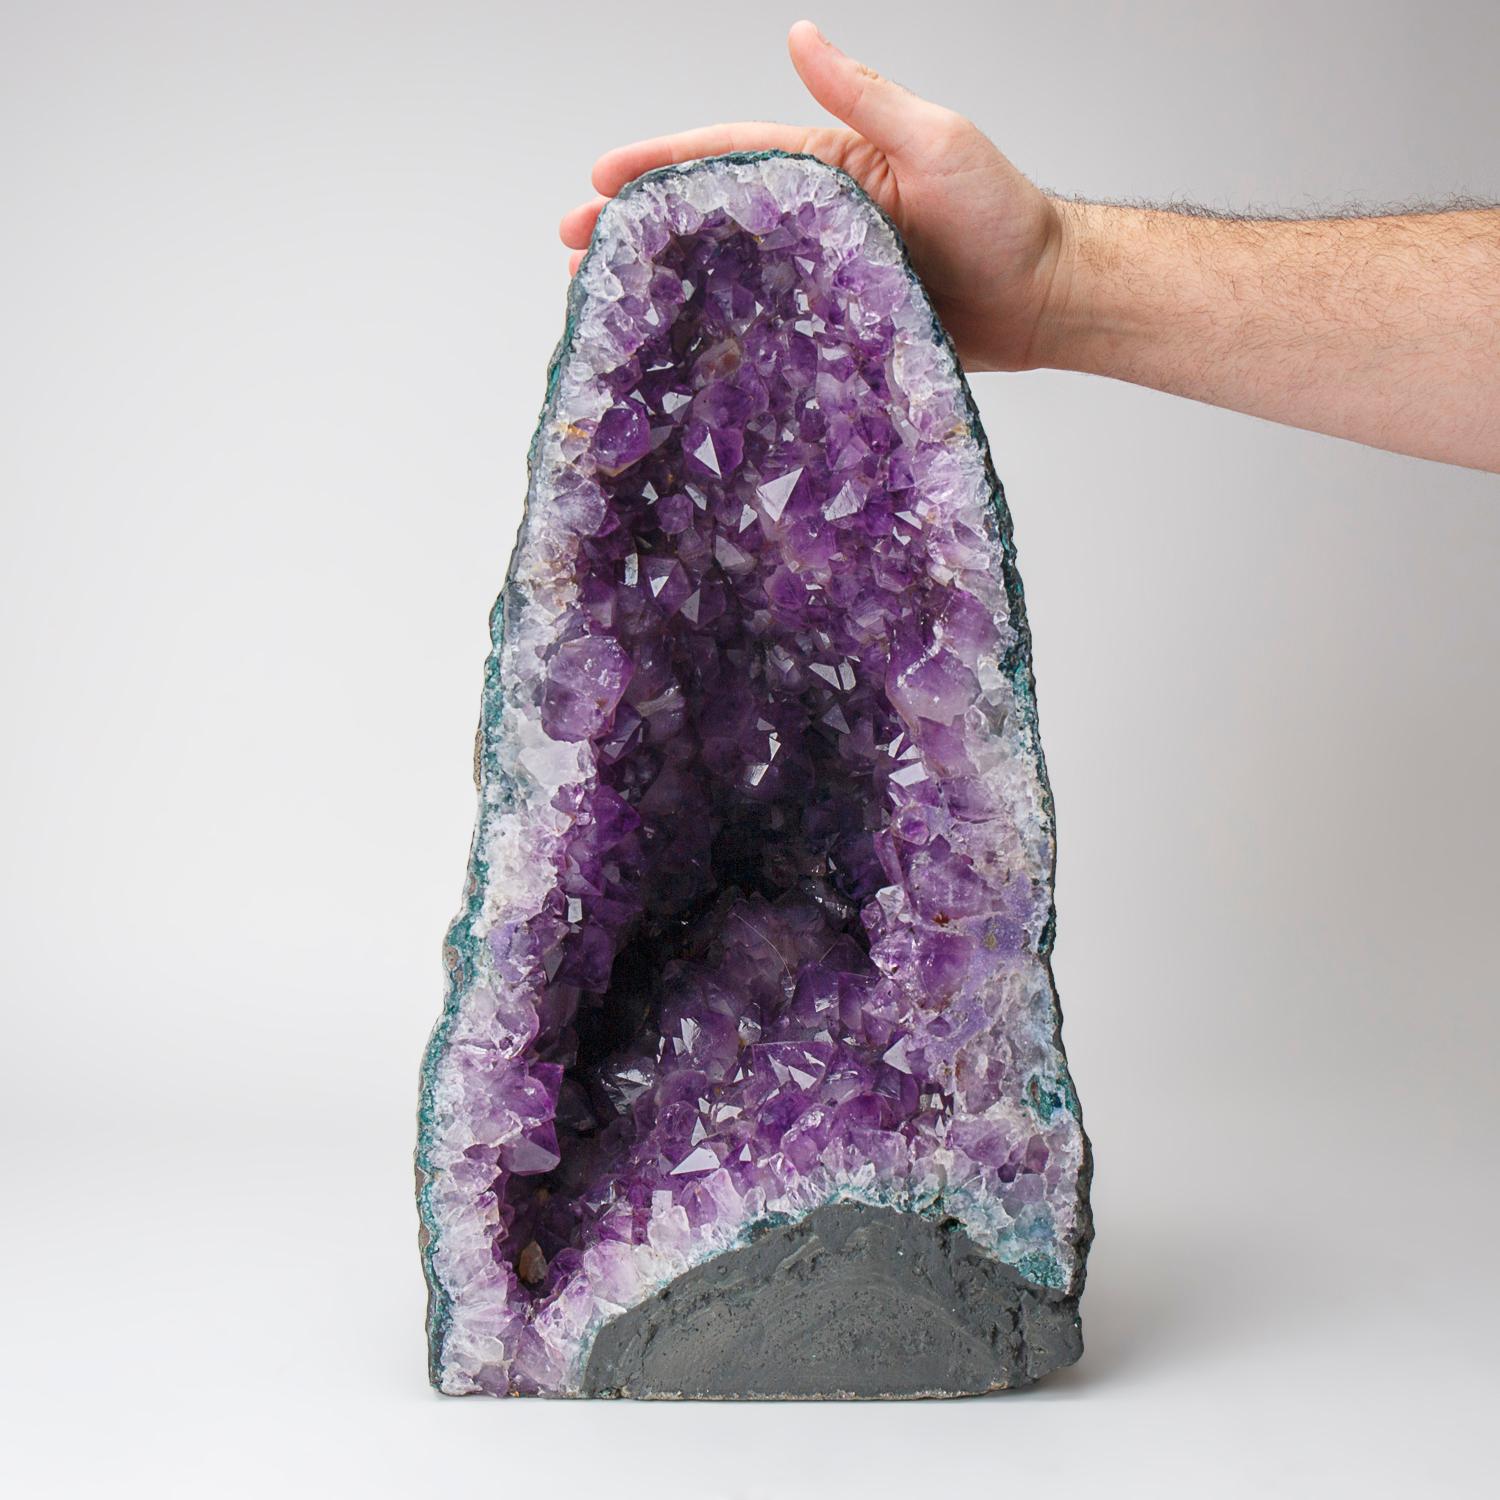 Contemporary Genuine Amethyst Cluster Geode from Brazil (54 lbs) For Sale